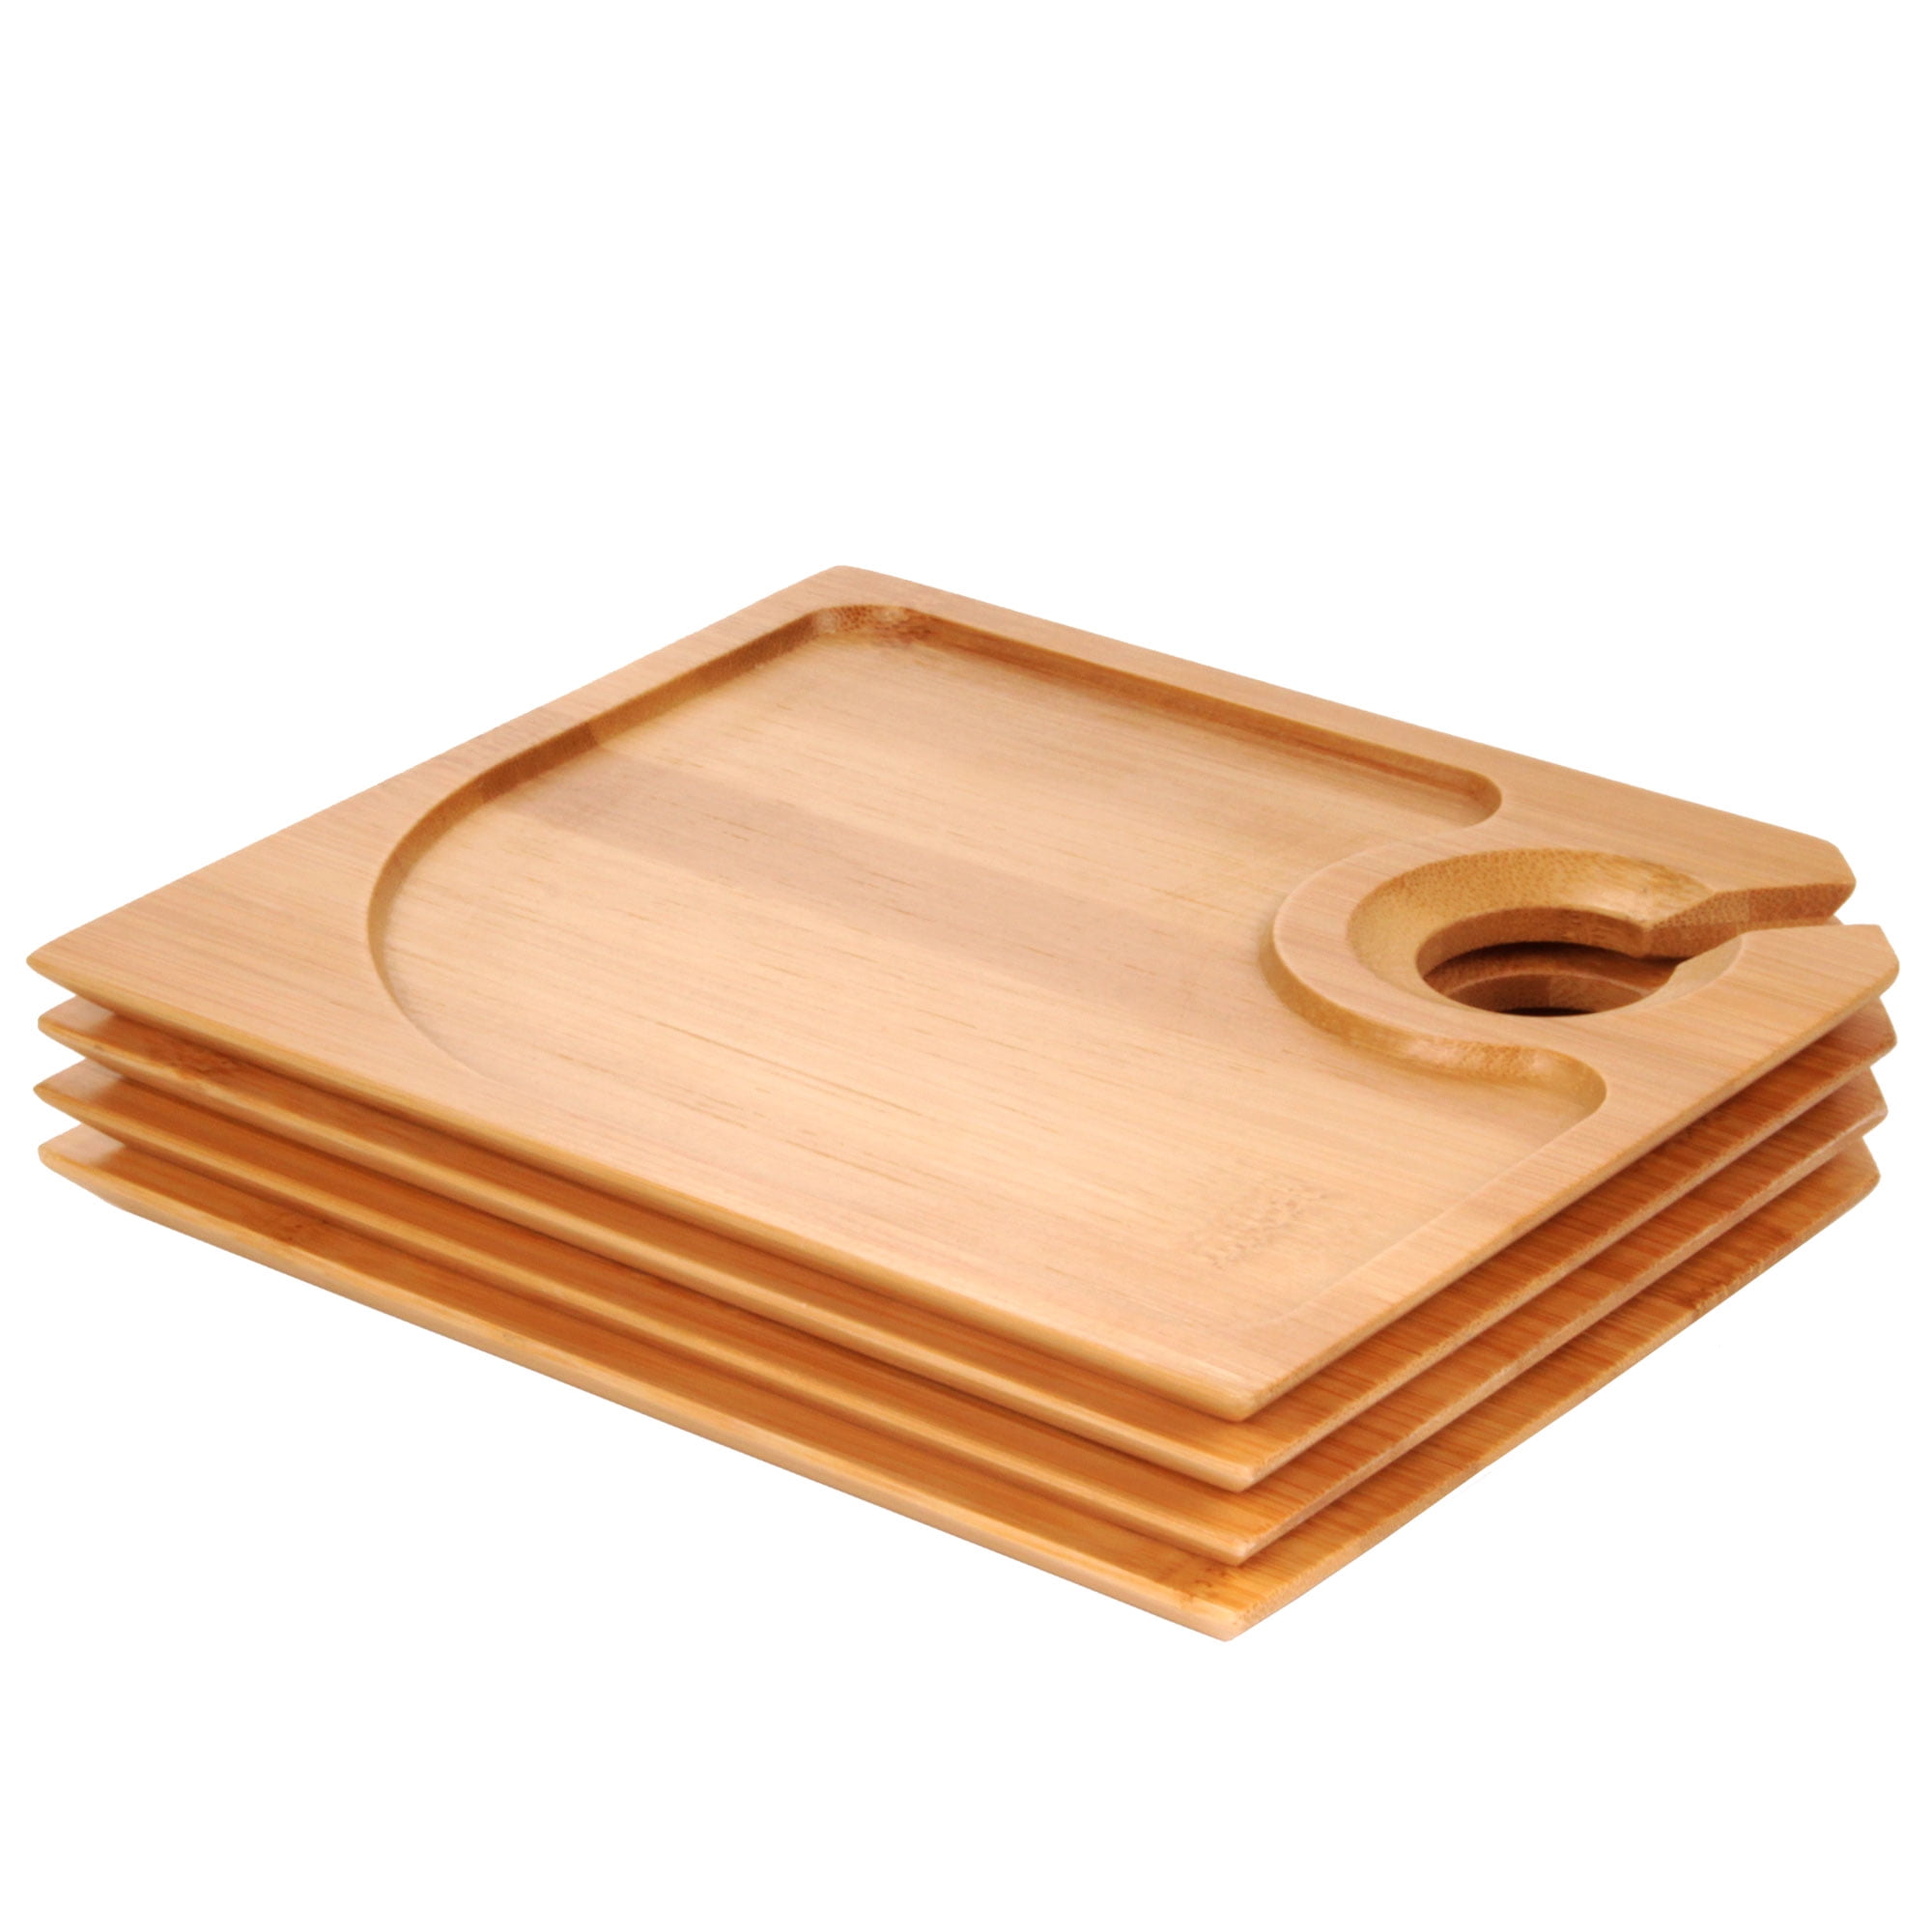 BambooMN 7 x 5.9 Bamboo Cocktail Appetizer Plates with Wine Glass Holder 4 Pieces 